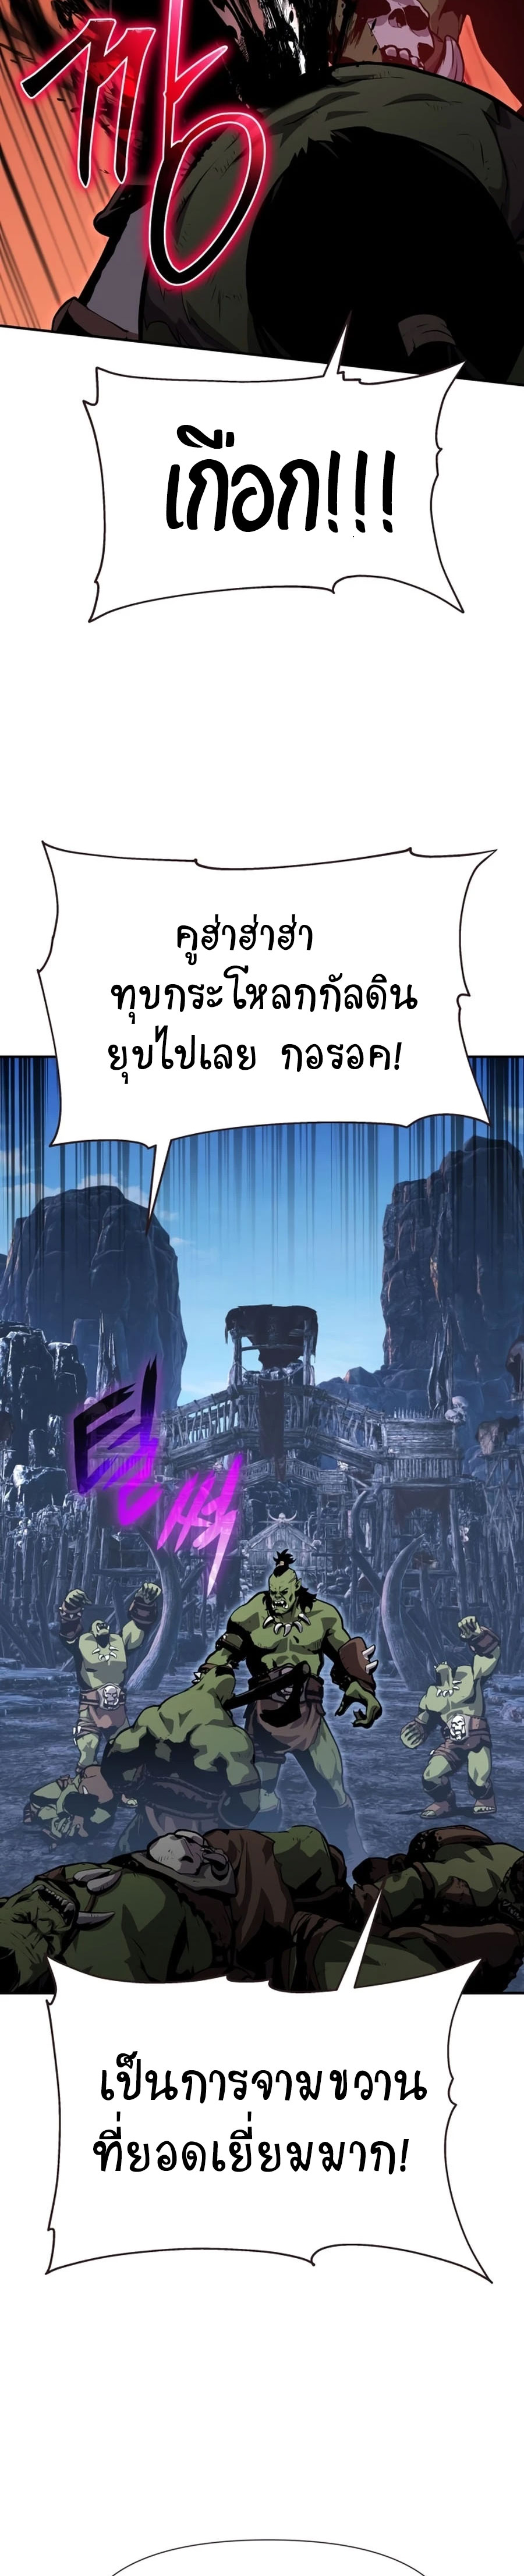 The Knight King 21 (14)